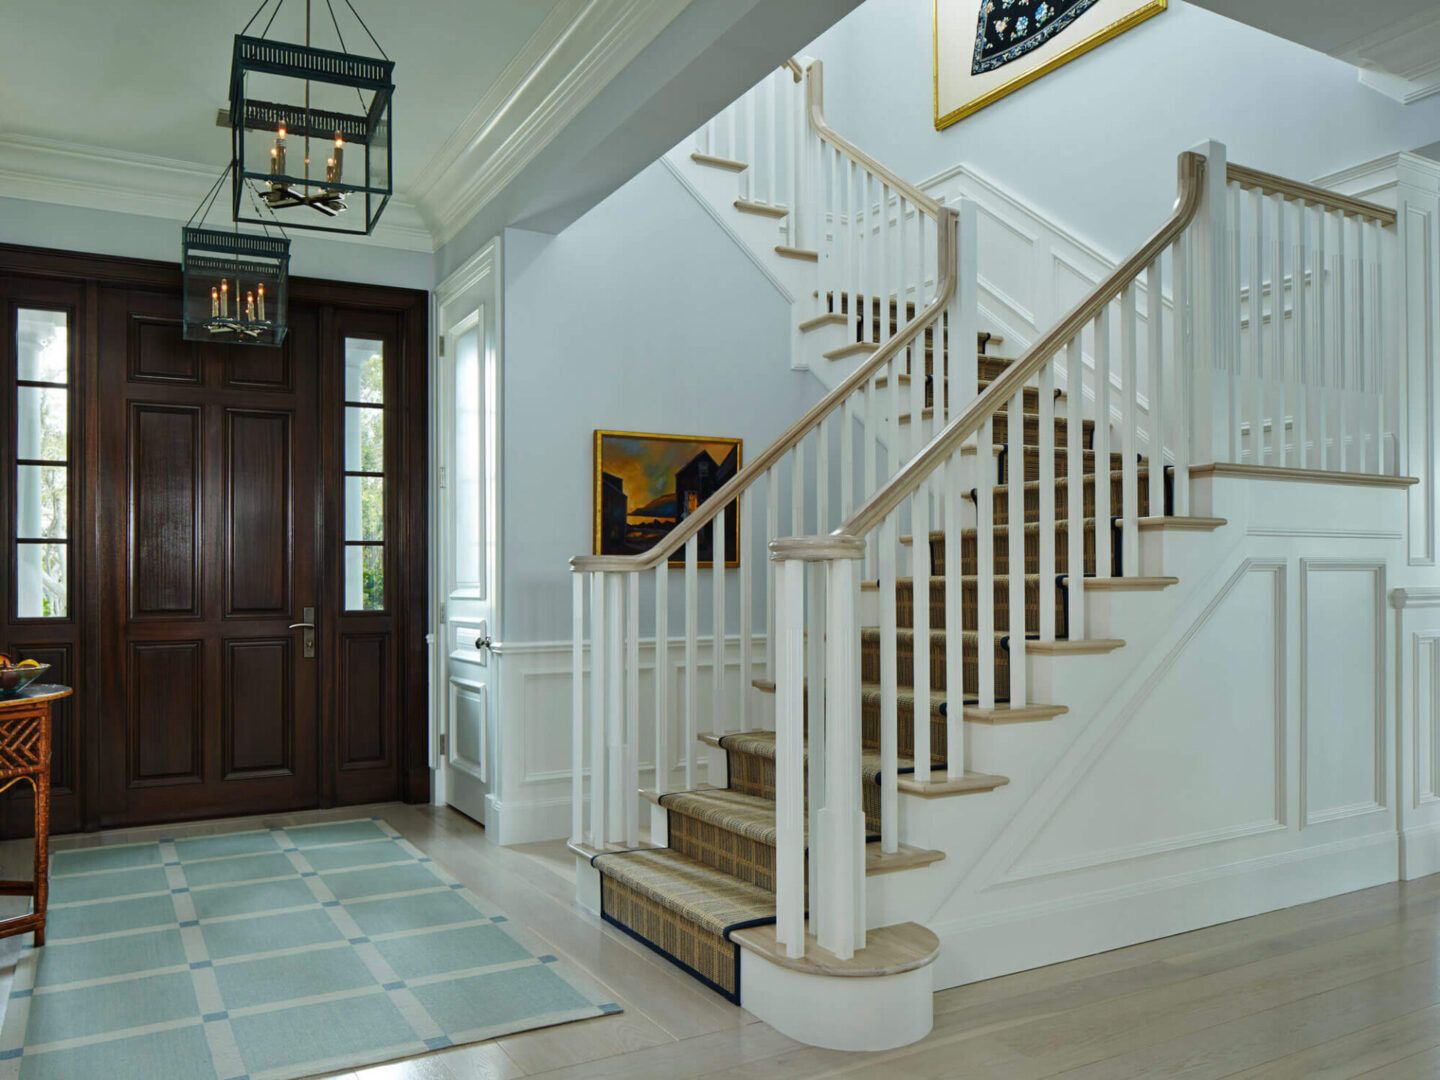 A white staircase with wooden steps and handrails.